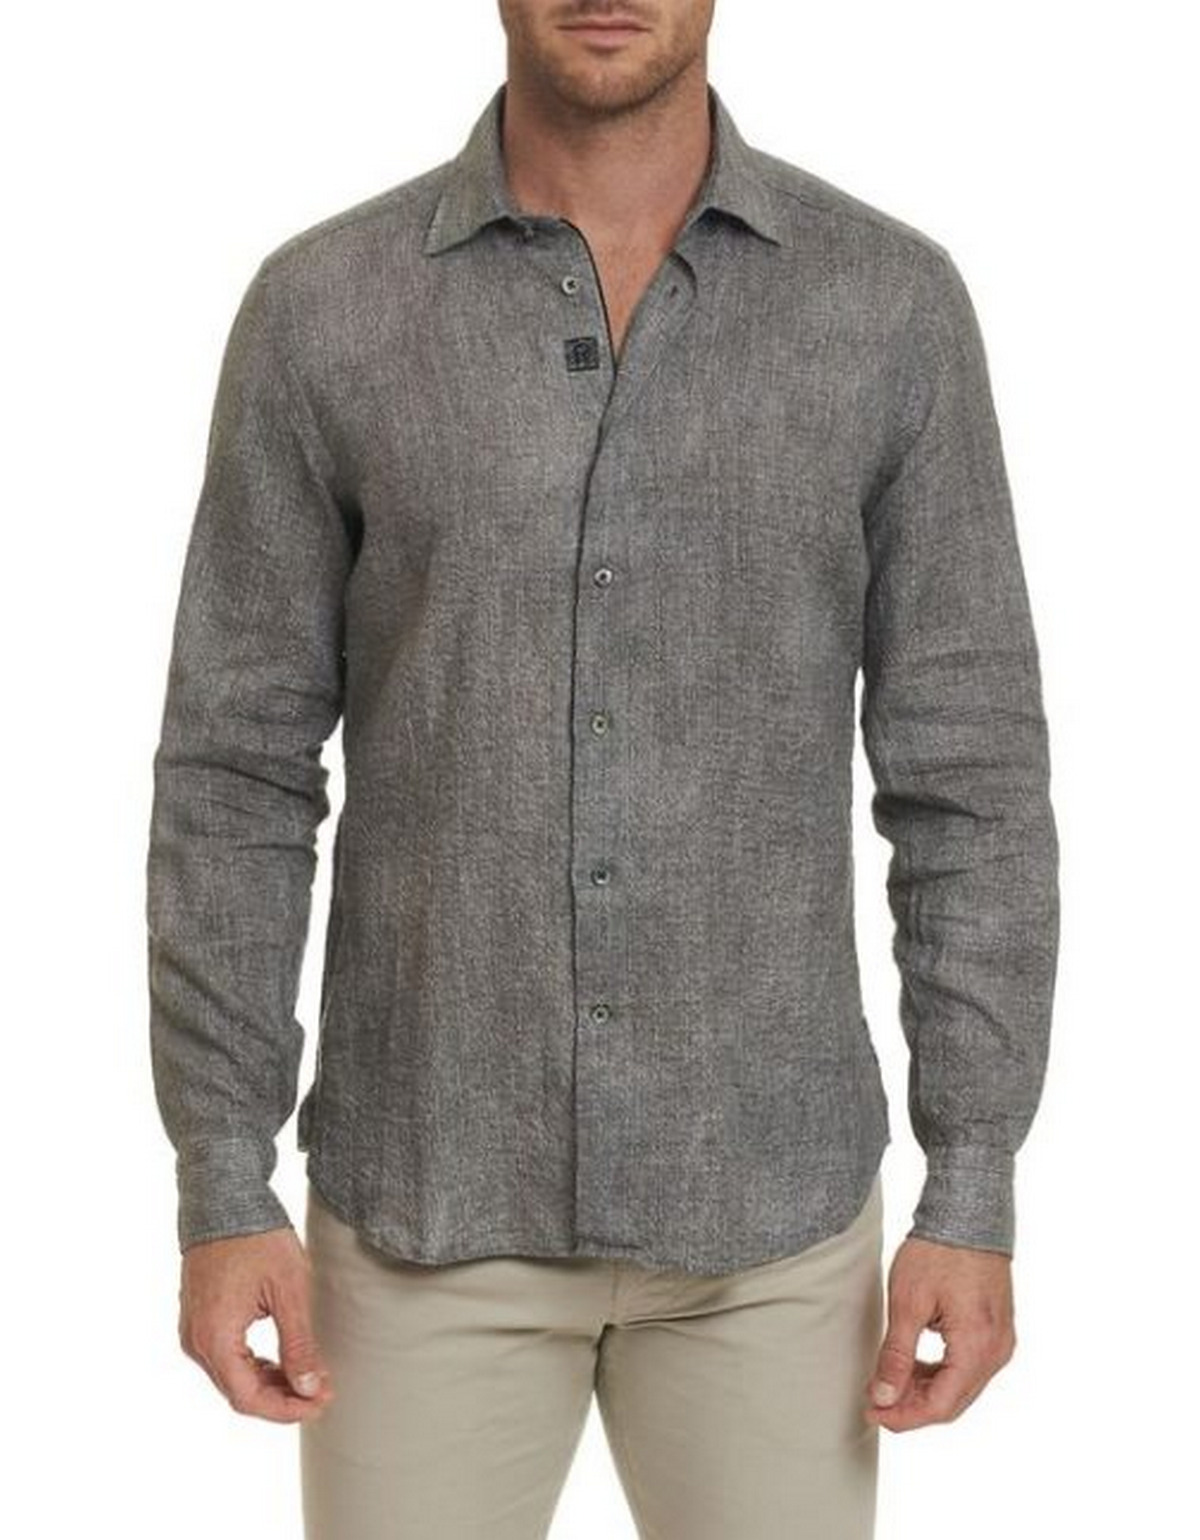  Gray Long-Sleeve Button-Down Shirts With Gray Chinos For Men